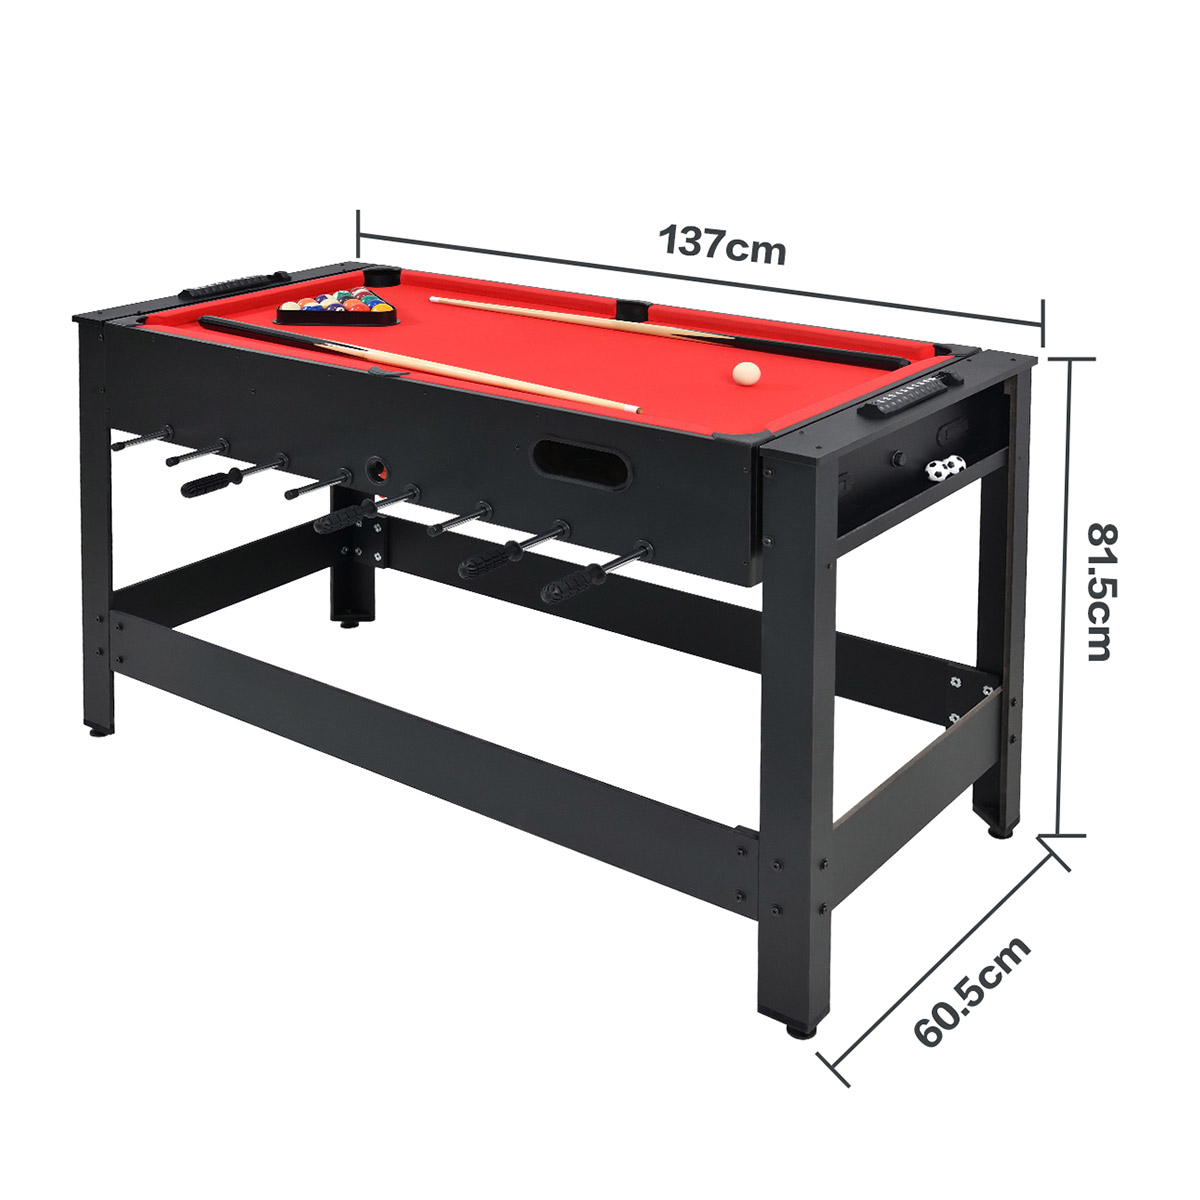 https://www.winmaxdartgame.com/versatile-game-table-2-1-foosball-and-pool-table-includes-complete-accessorieswin-max-product/